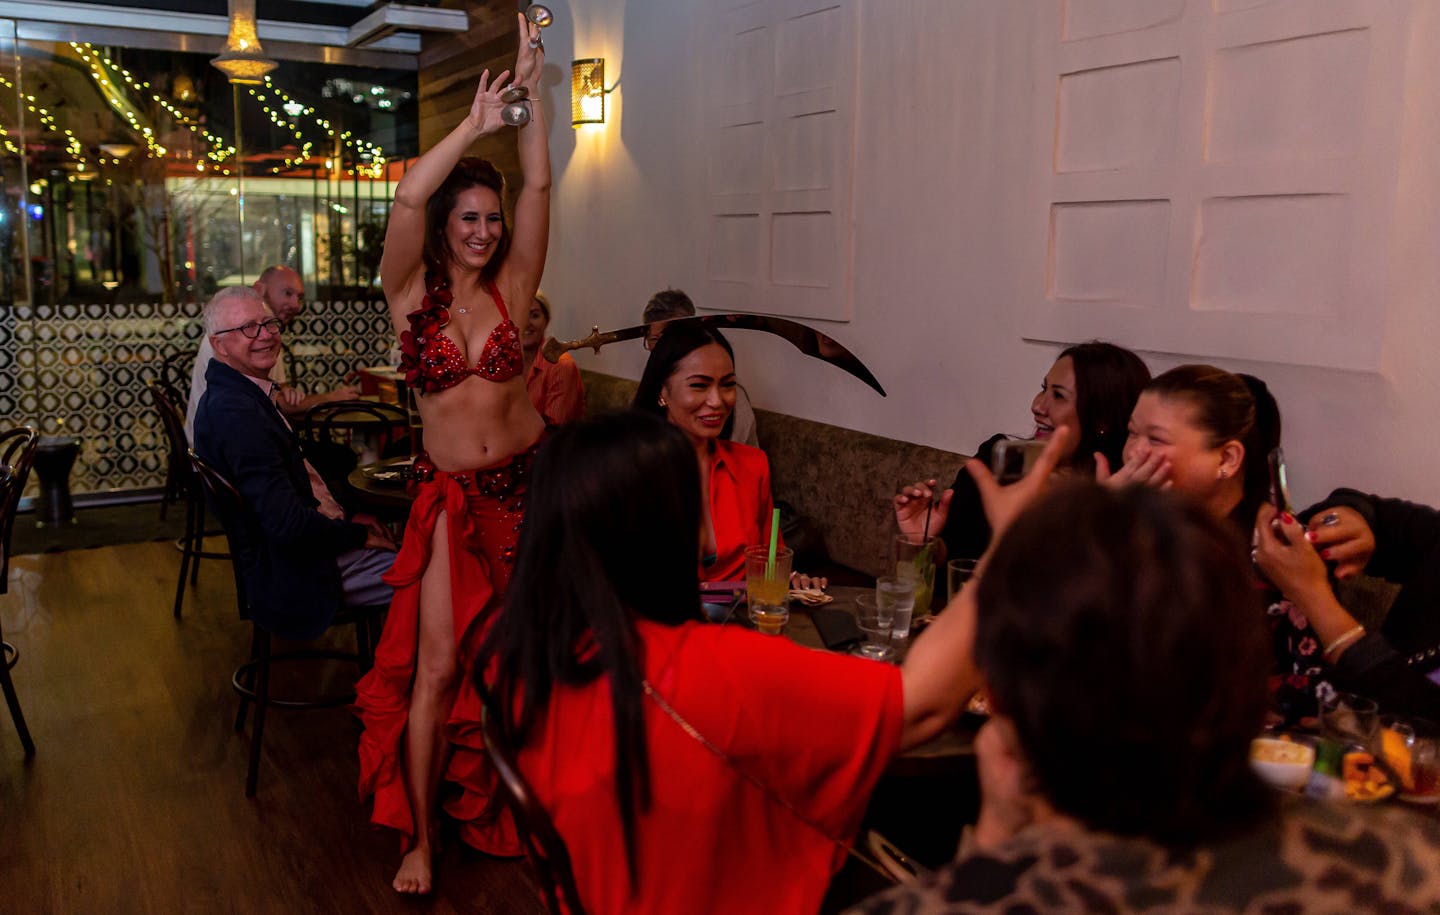 Belly dancer performing at Bar Beirut. She is balancing a sword on a seated customer's head.